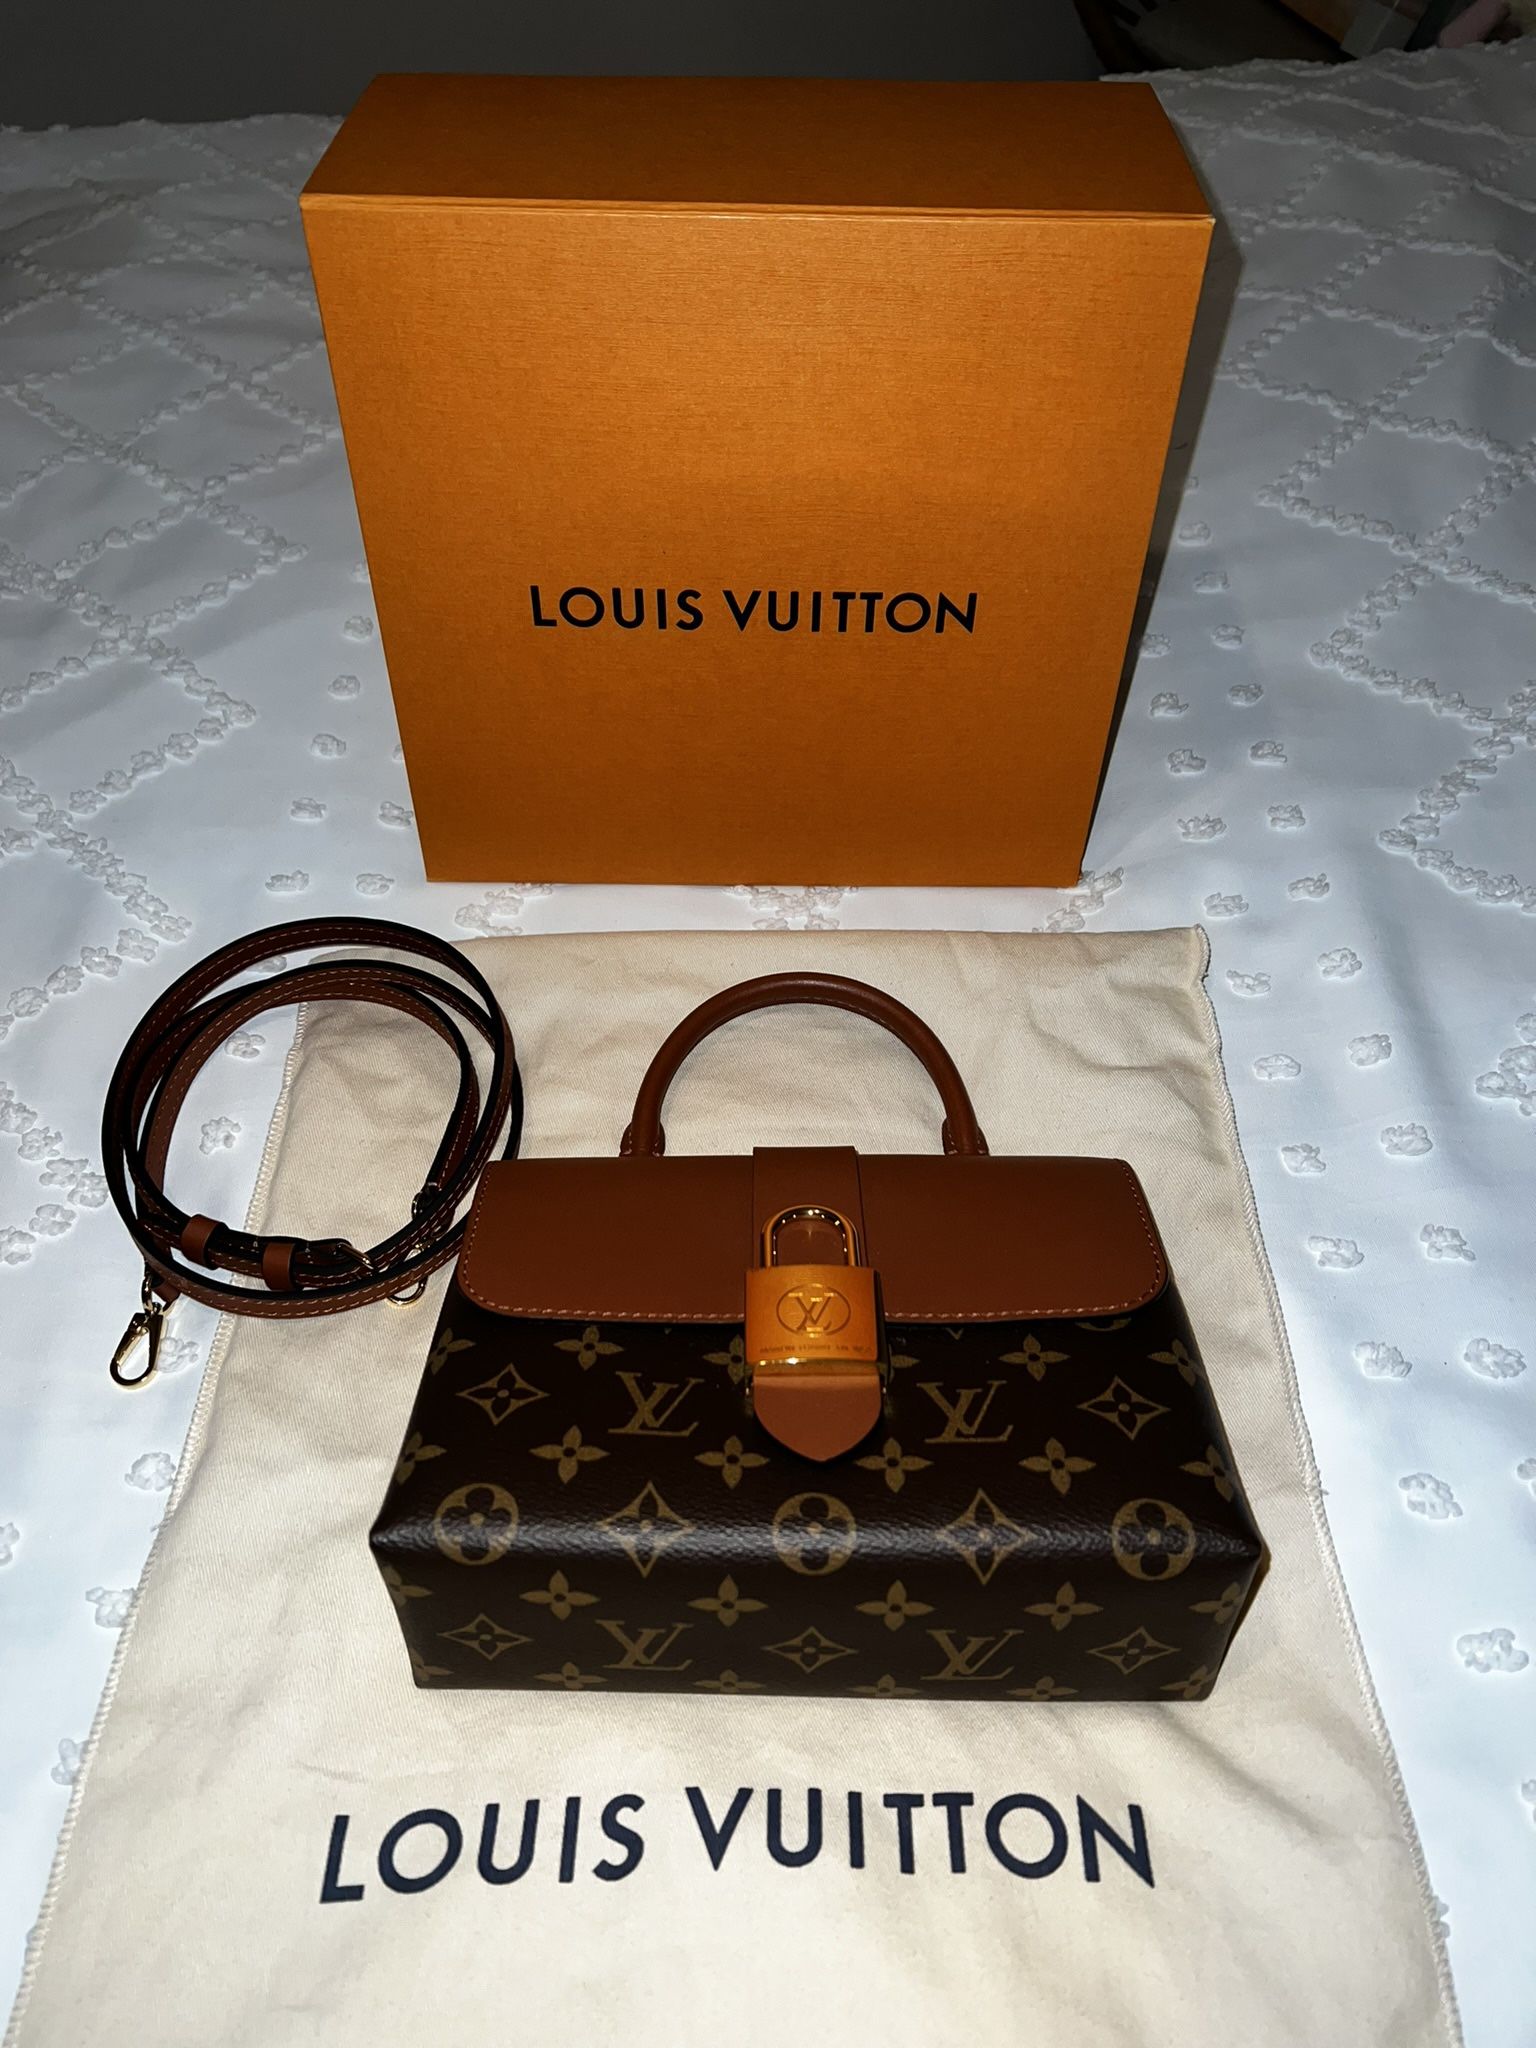 Louis Vuitton - Authenticated LOCKY Bb Handbag - Leather Red Plain for Women, Good Condition